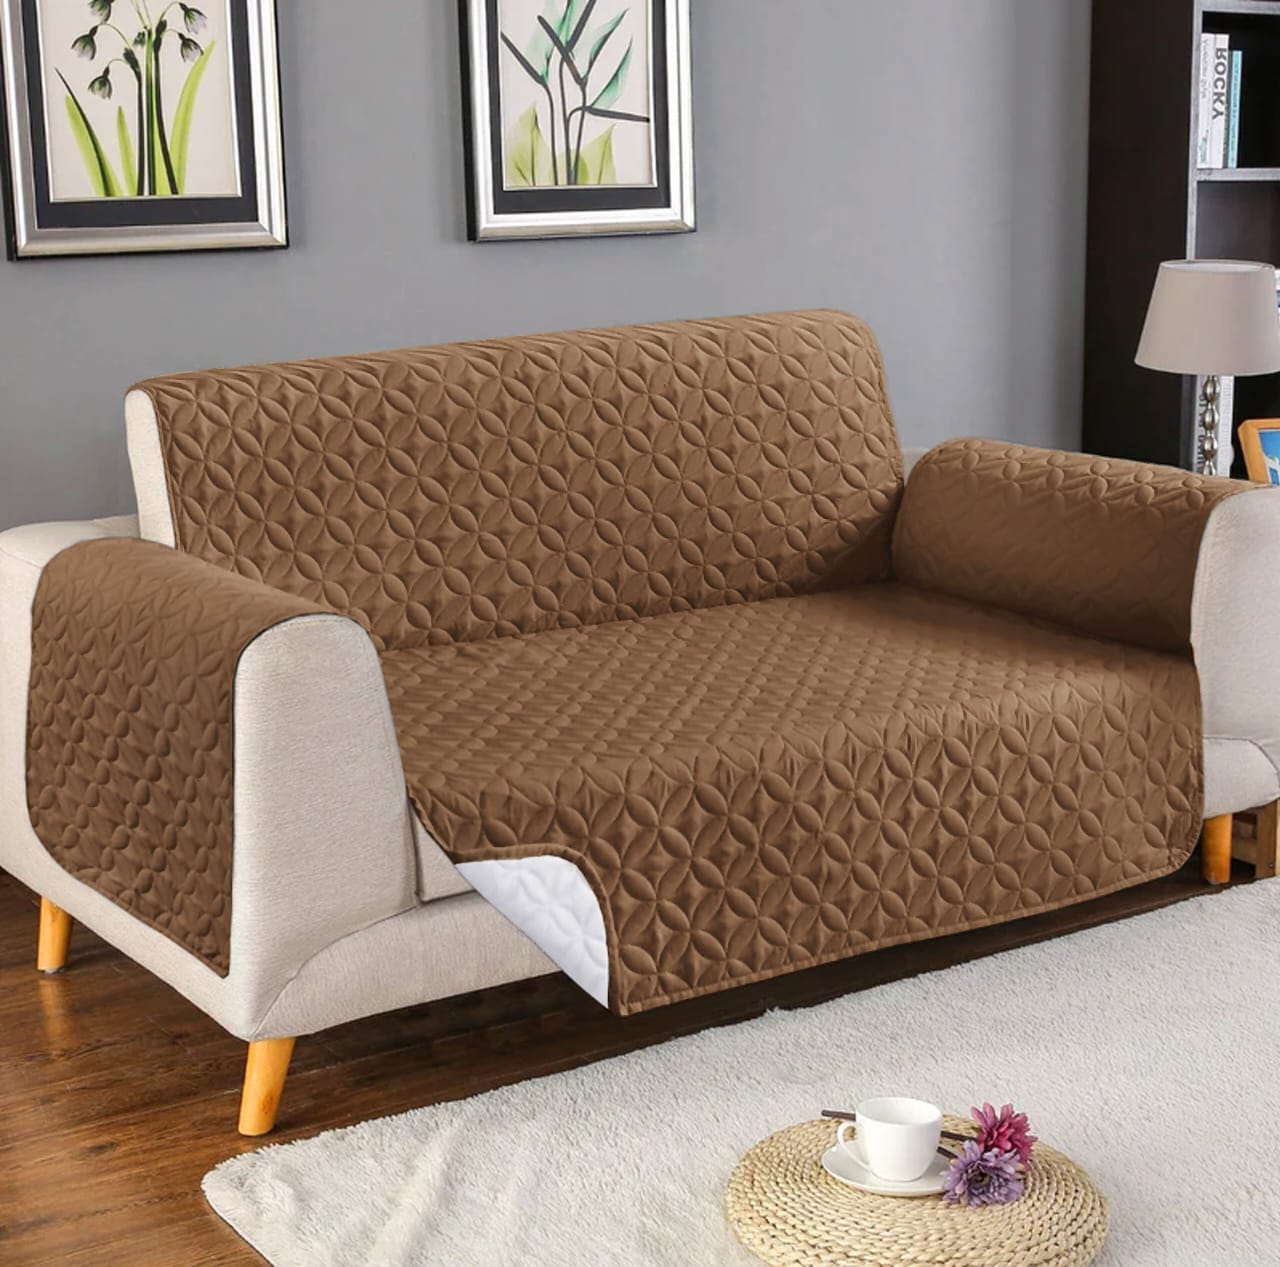 Quilted Sofa Covers (7 Seater)